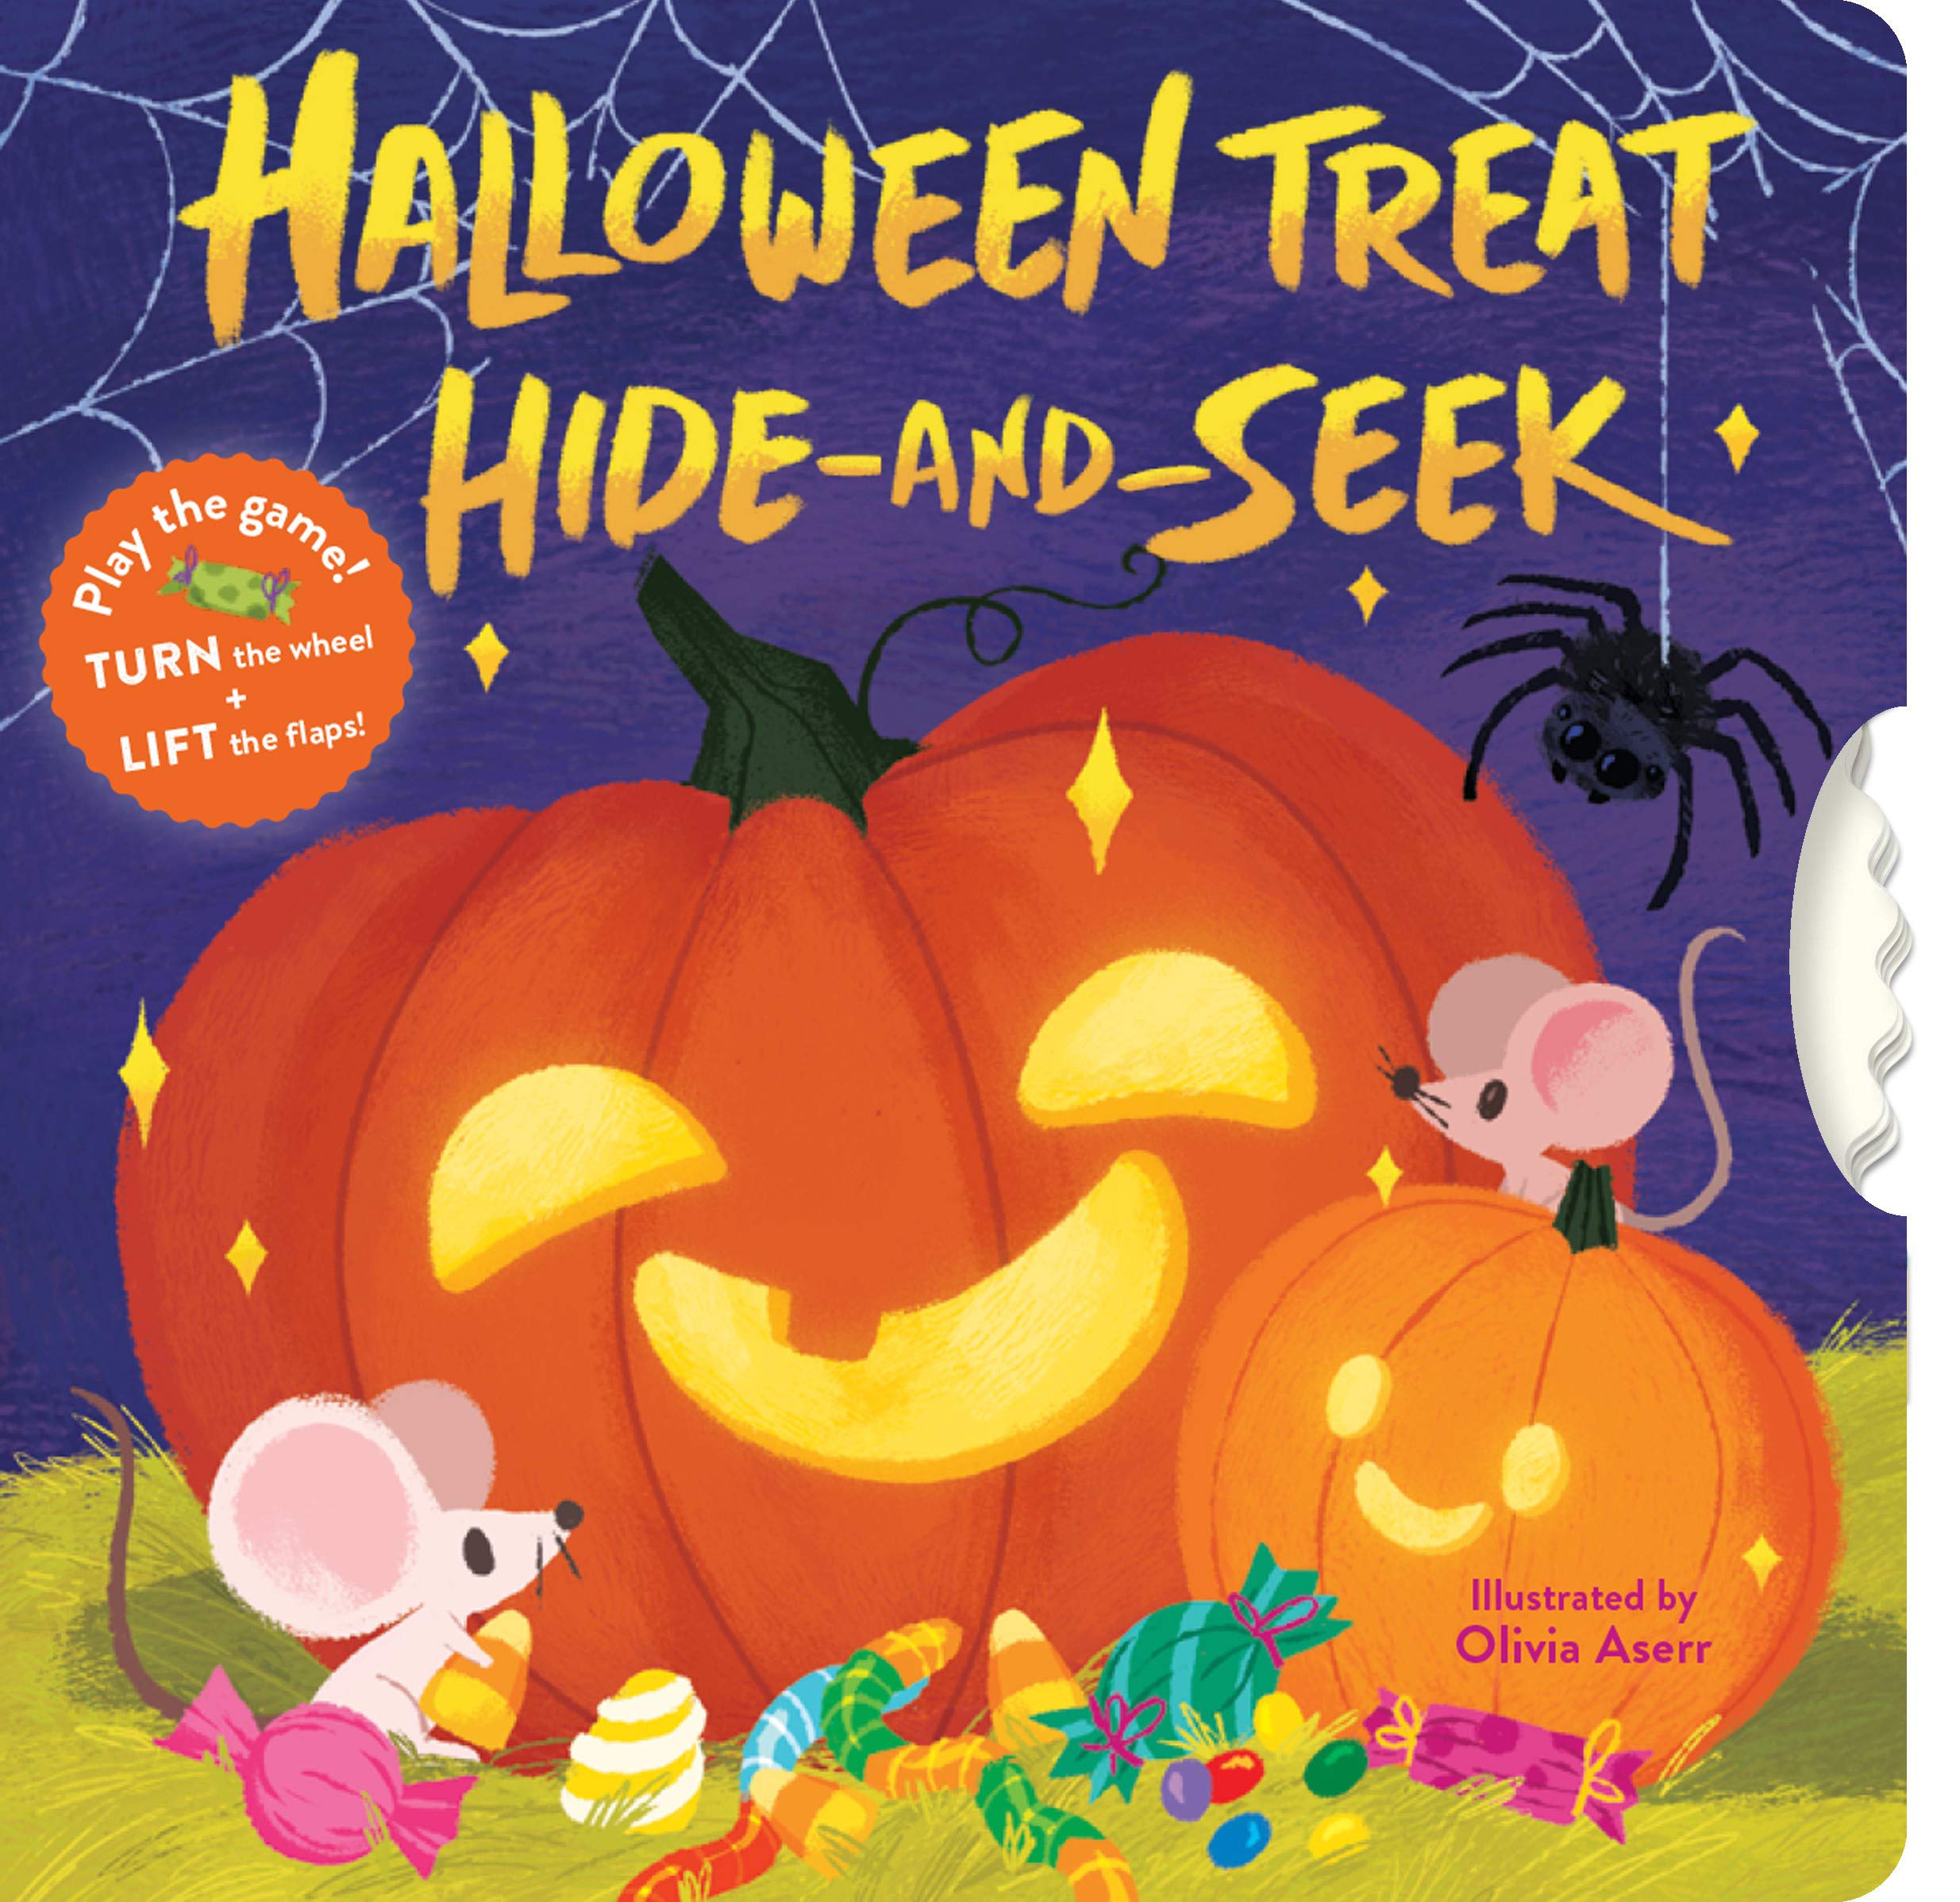 A novelty board book cover with pumpkins against a purple backdrop, surrounded by candies, little mice, and friendly spiders. The right edge of the book features a wheel that can be spun.